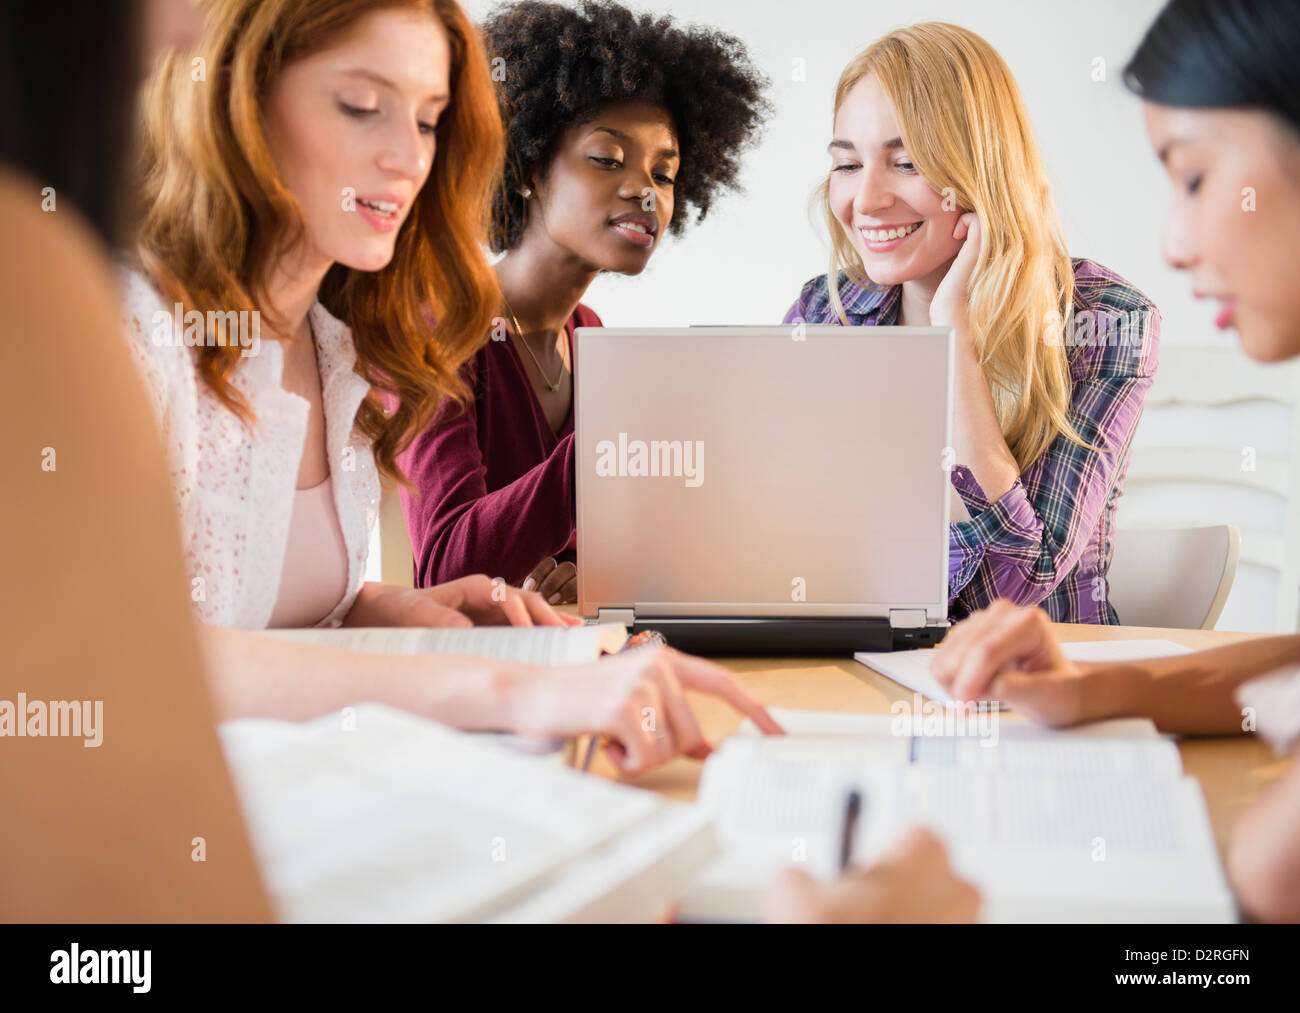 Businesswomen working together in meeting Stock Photo